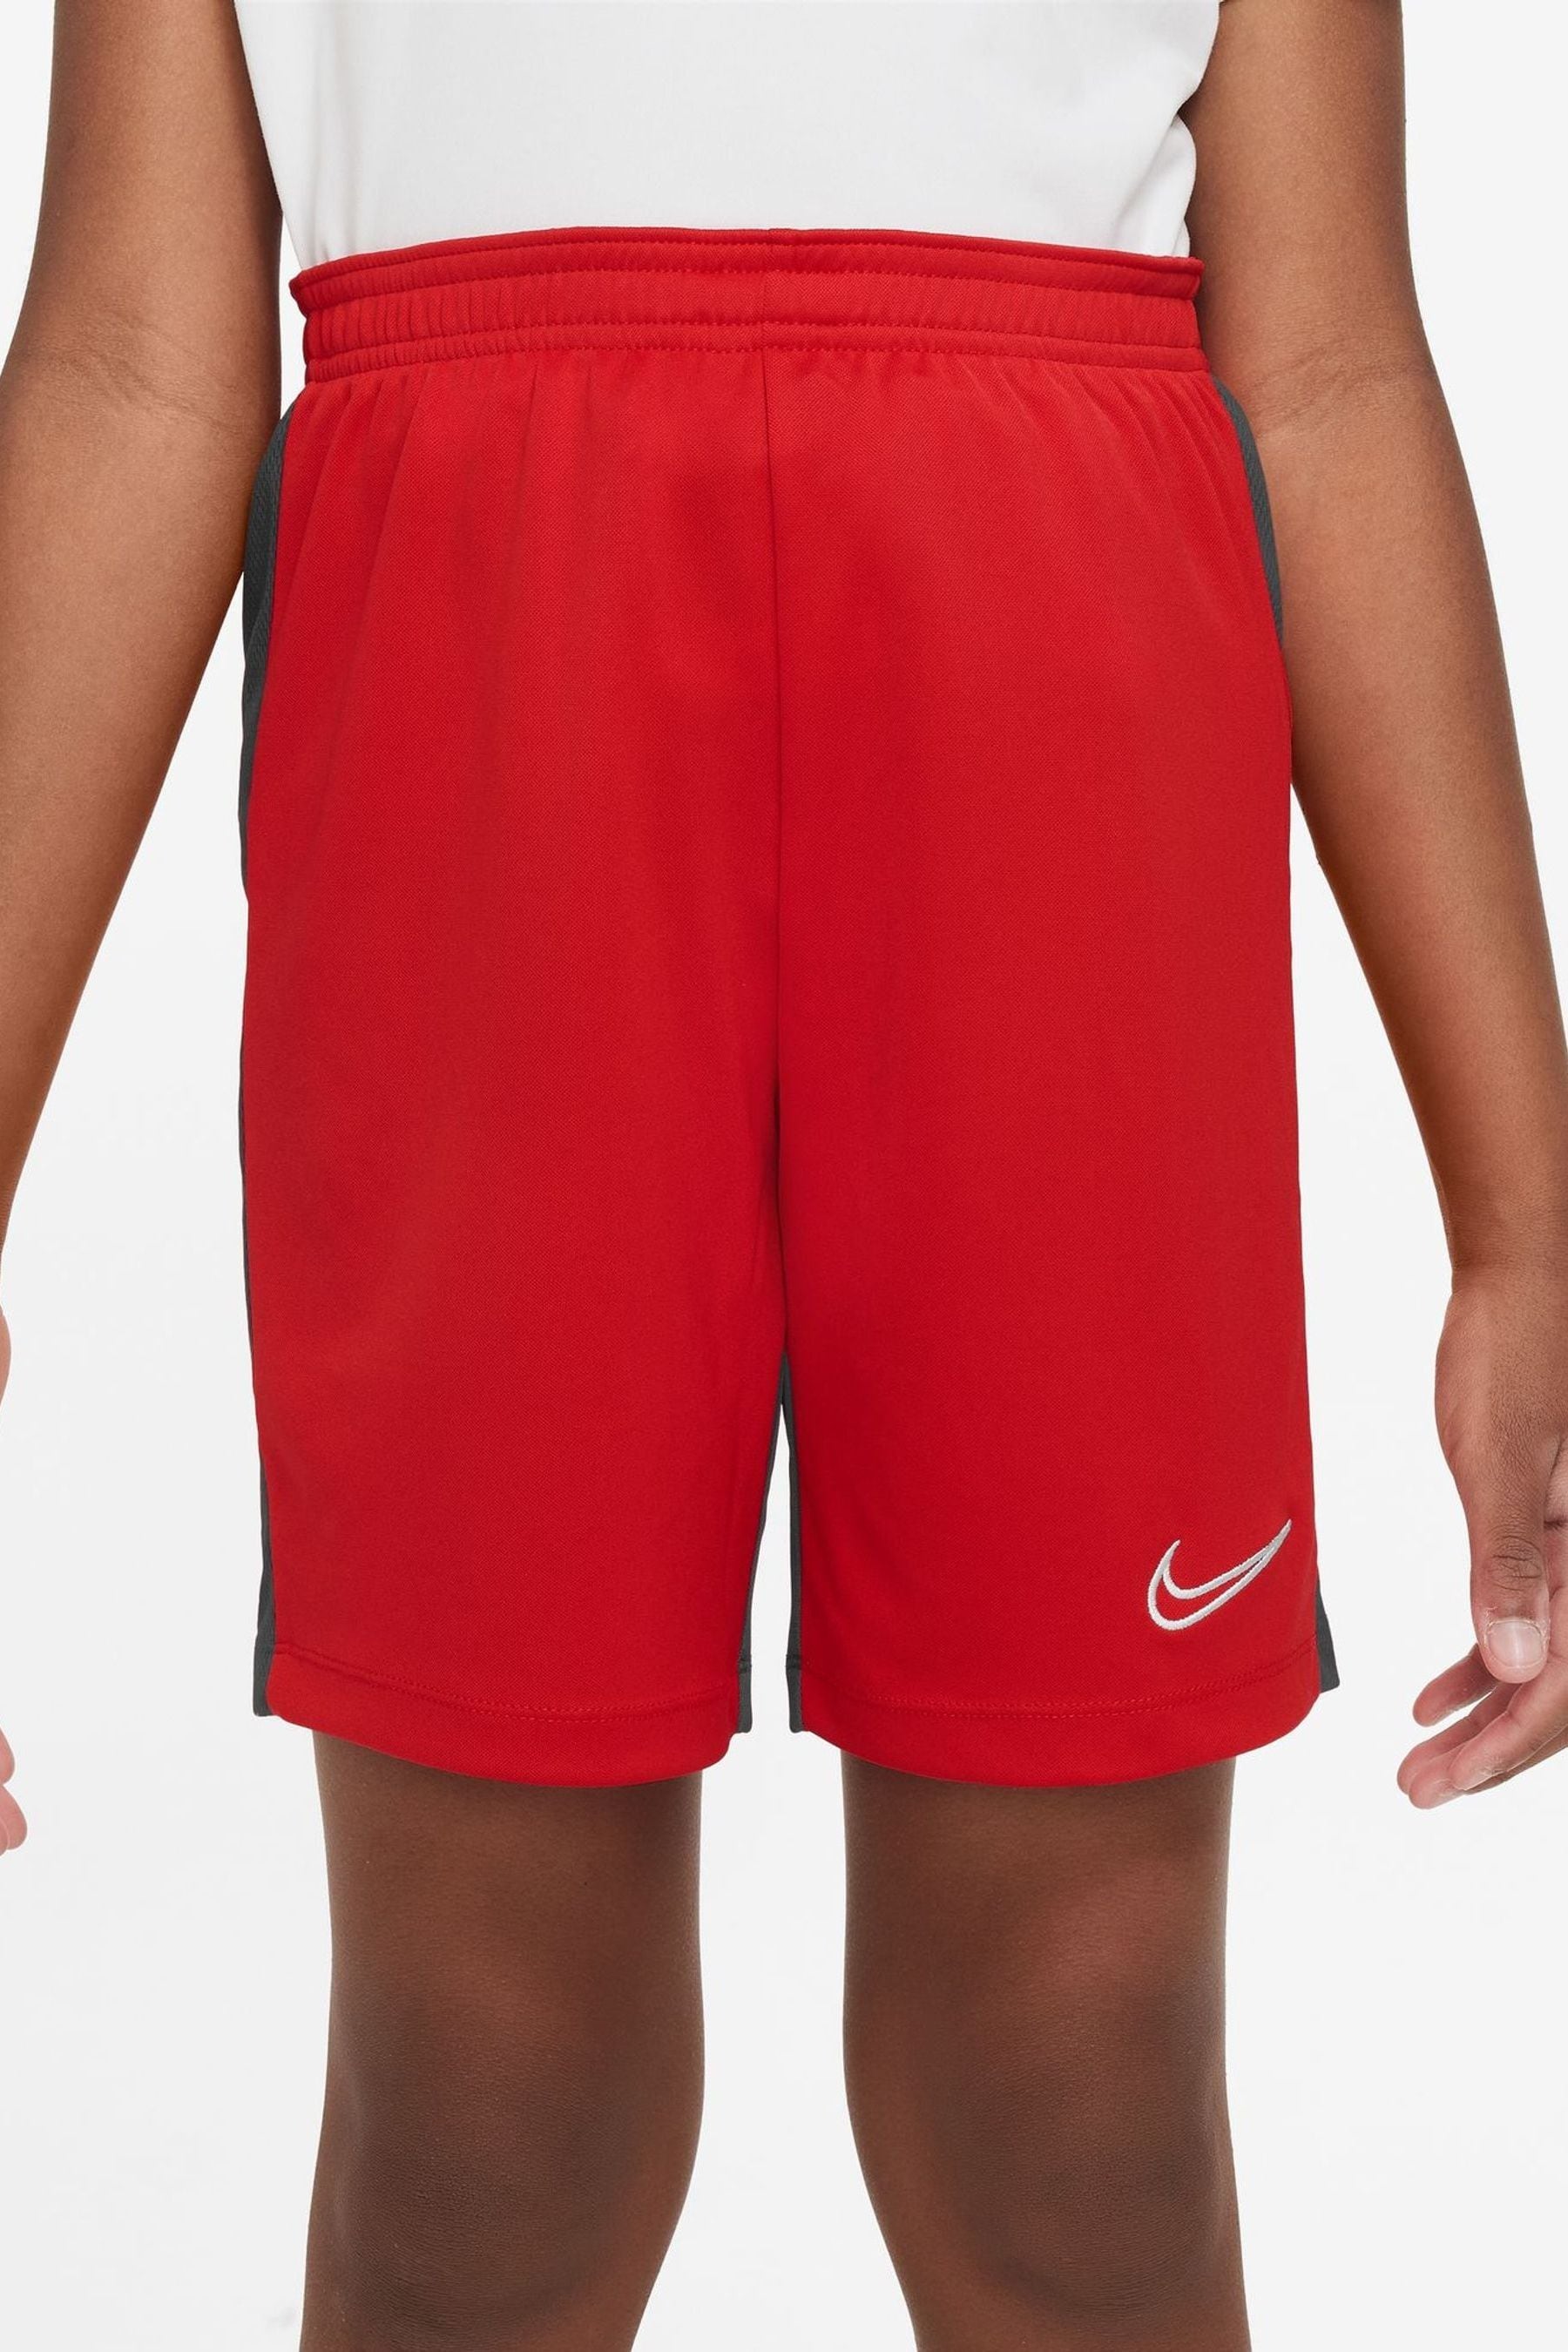 Buy Nike Red Dri-FIT Academy Training Shorts from the Next UK online shop